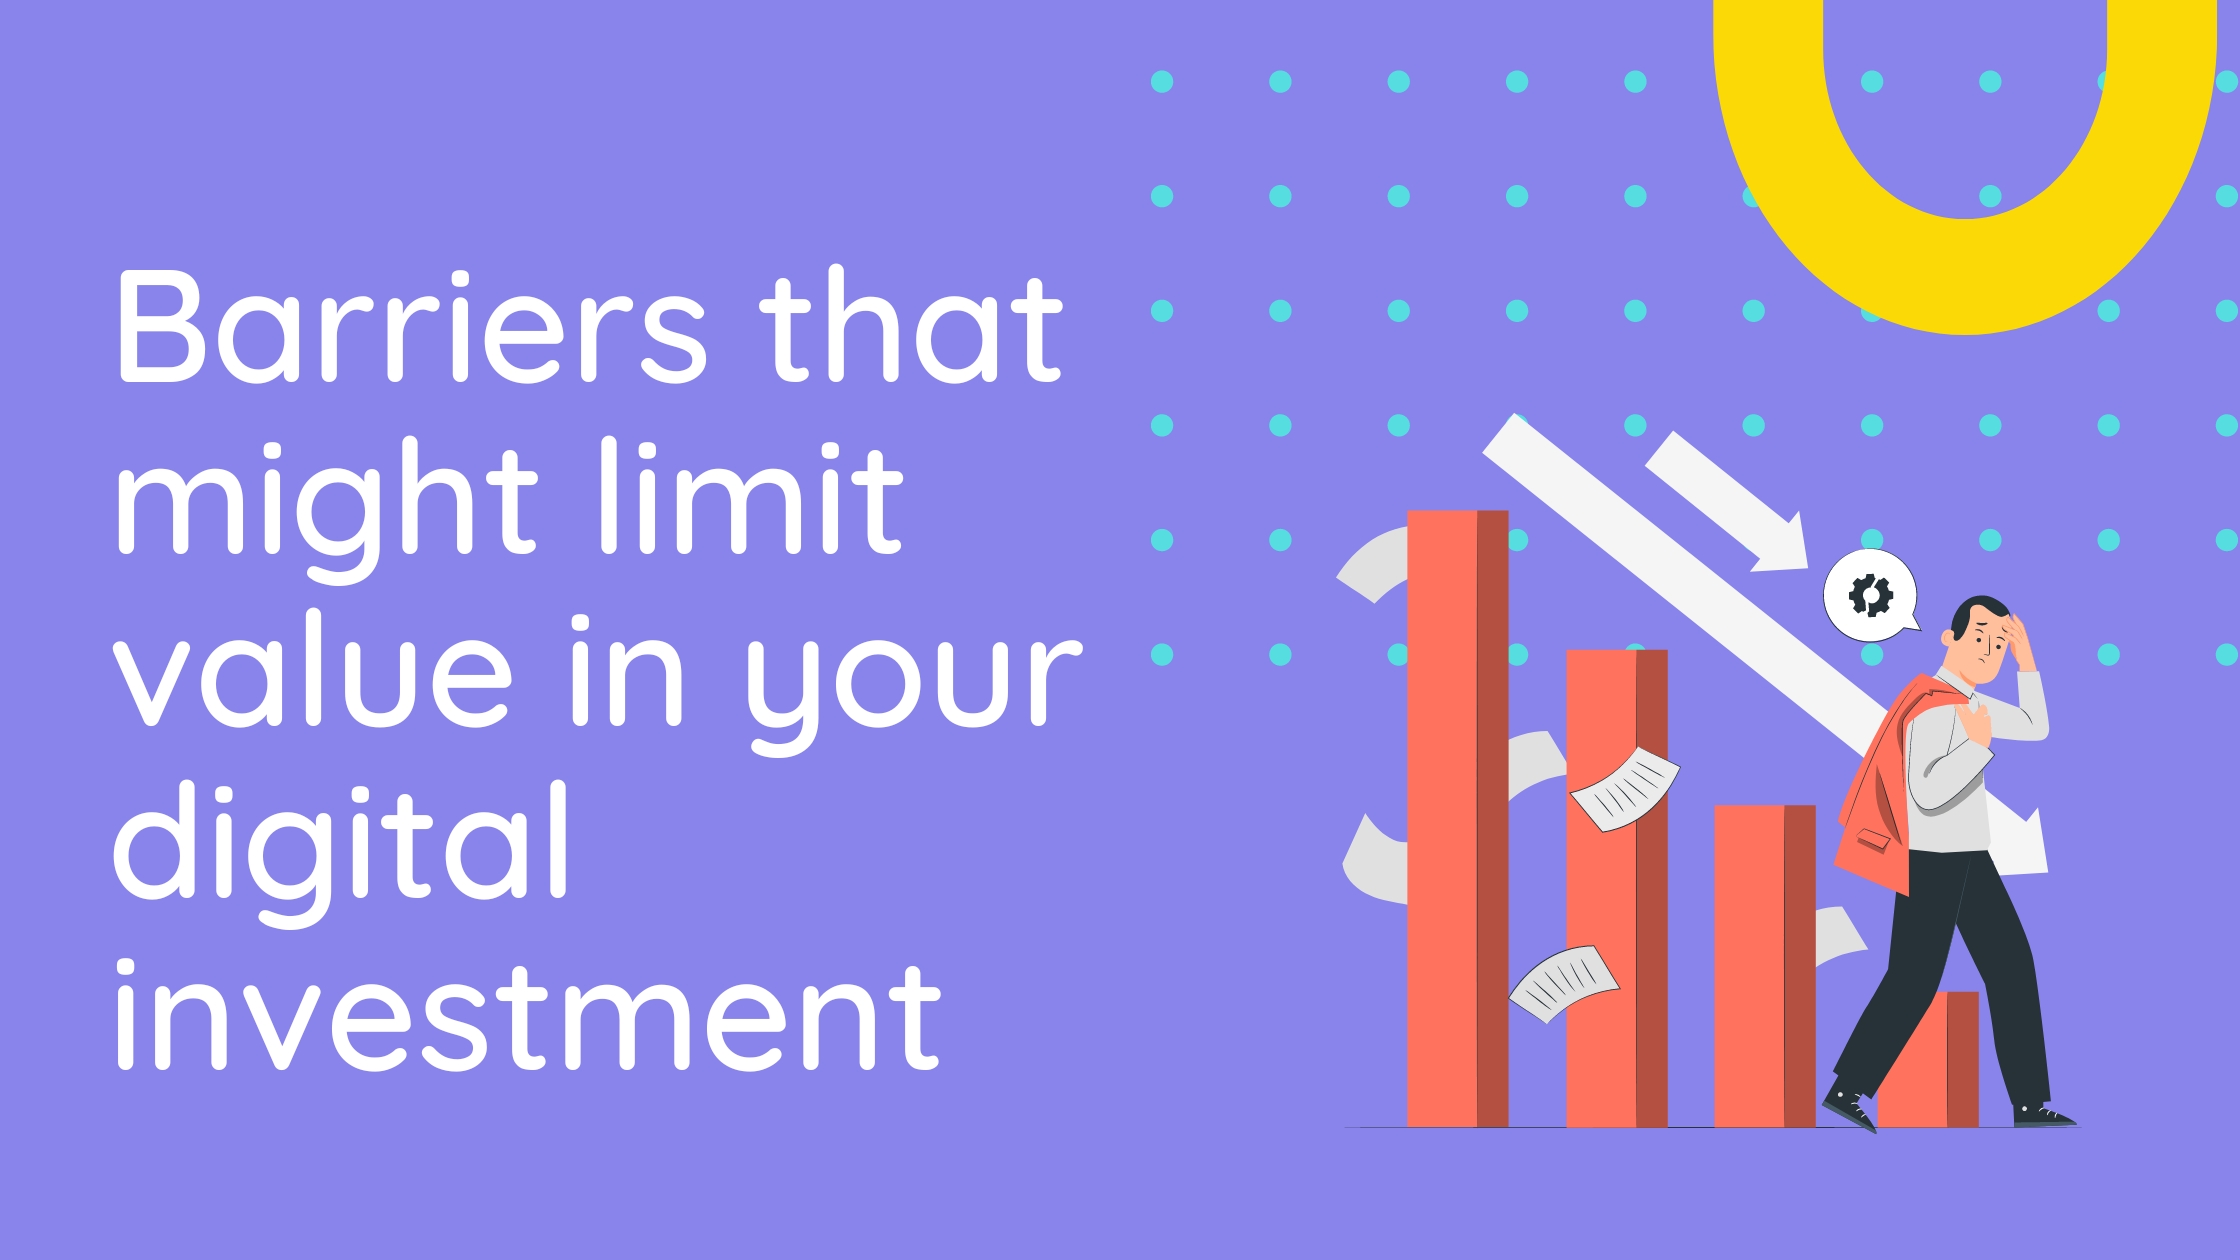 Barriers that might limit the value of your digital investment